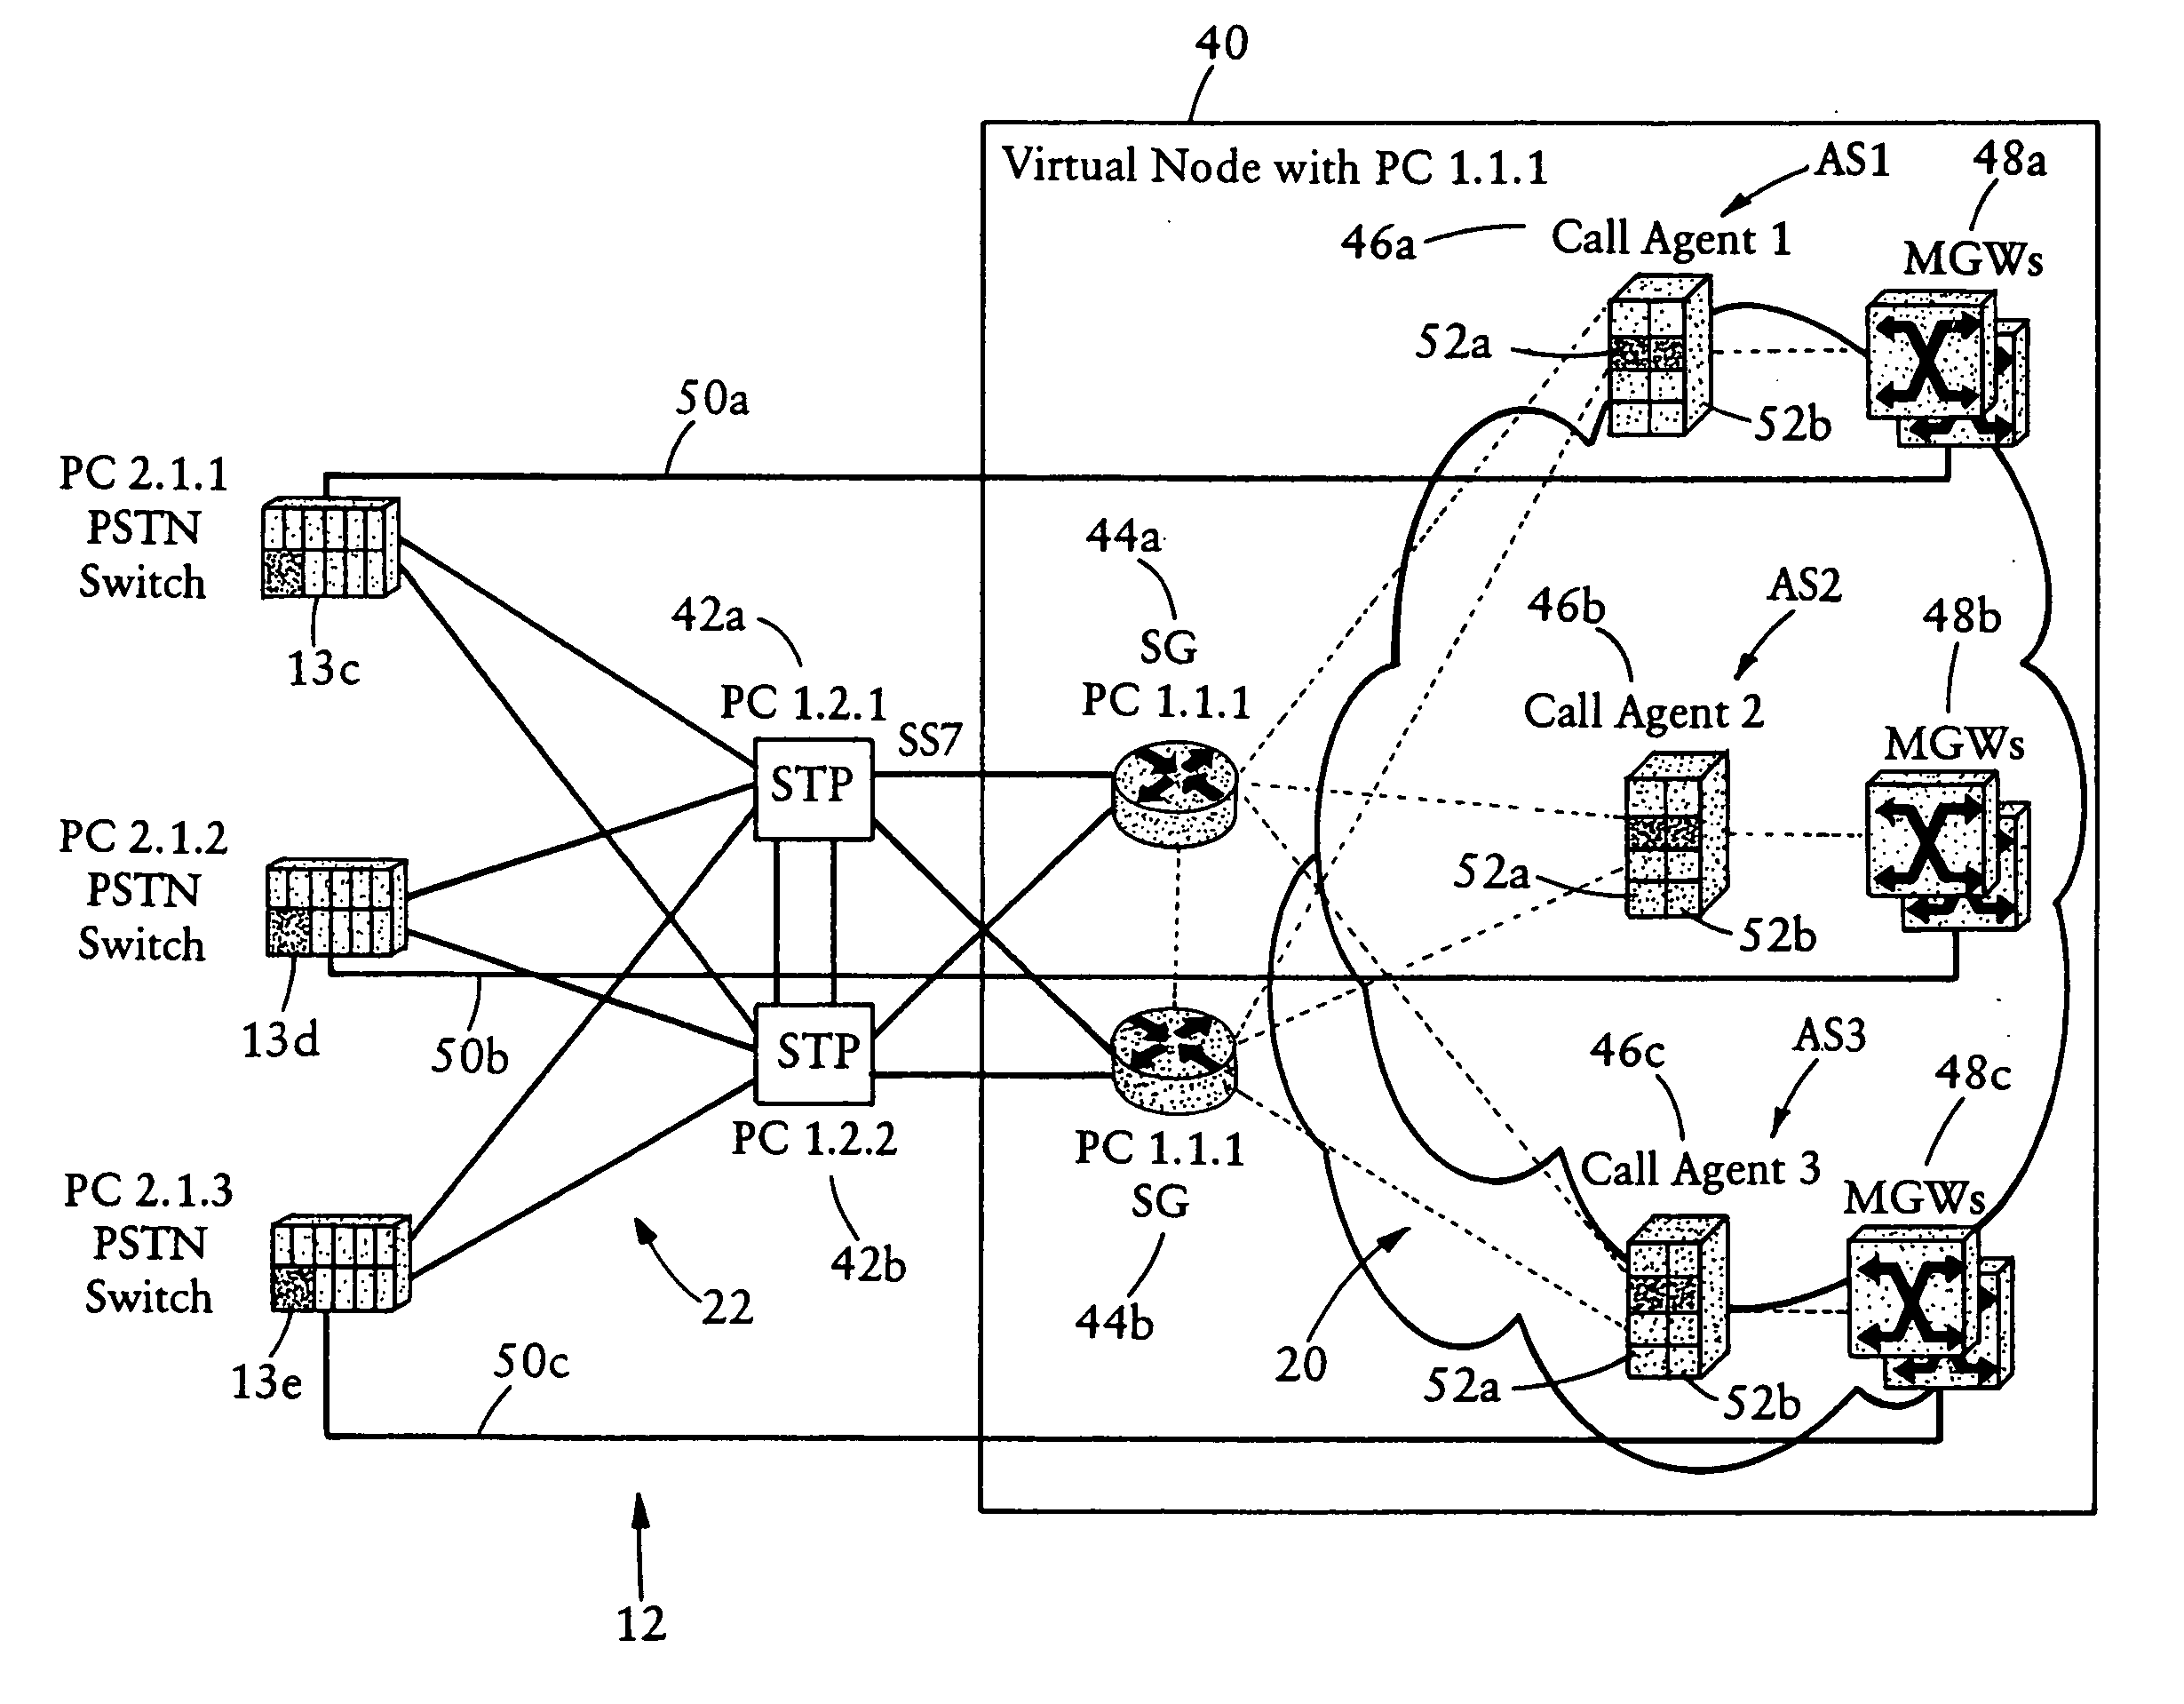 Arrangement for sharing a single signaling point code between multiple hosts in an IP-based network